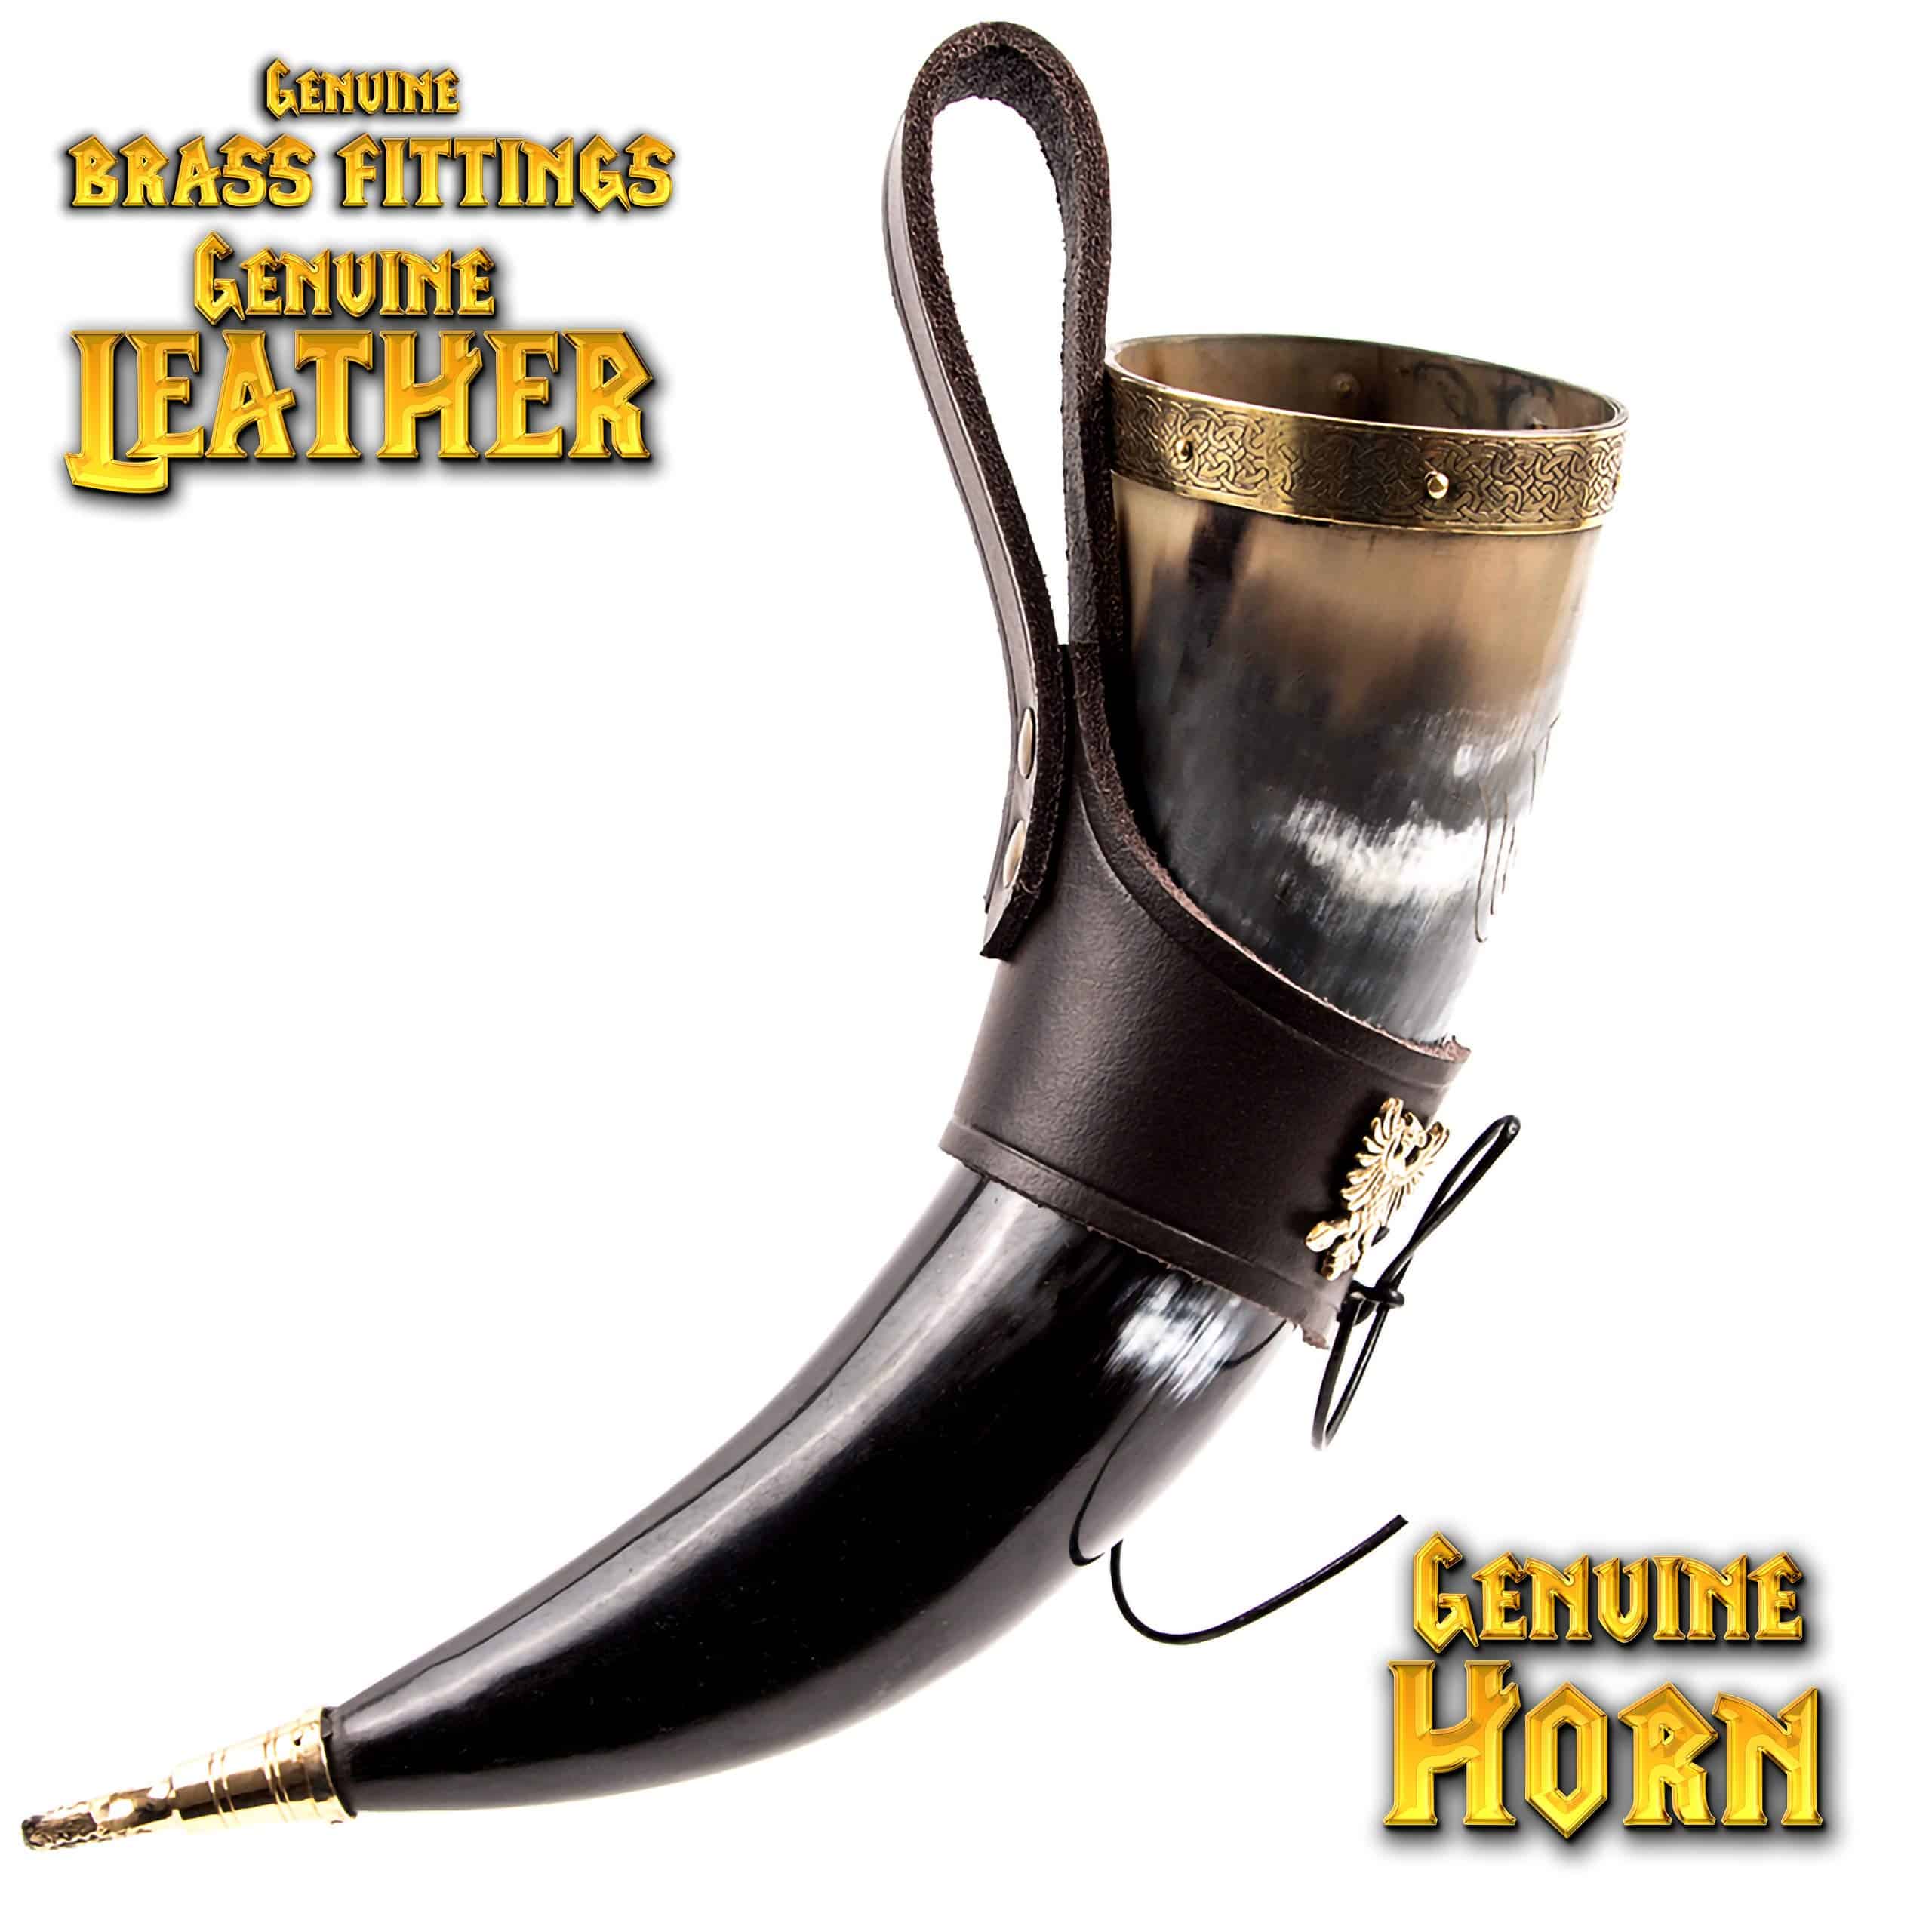 Mythrojan The Bird of Prey Viking Drinking Horn with Brown Leather Holder Authentic Medieval Inspired Viking Wine/Mead Mug - Polished Finish